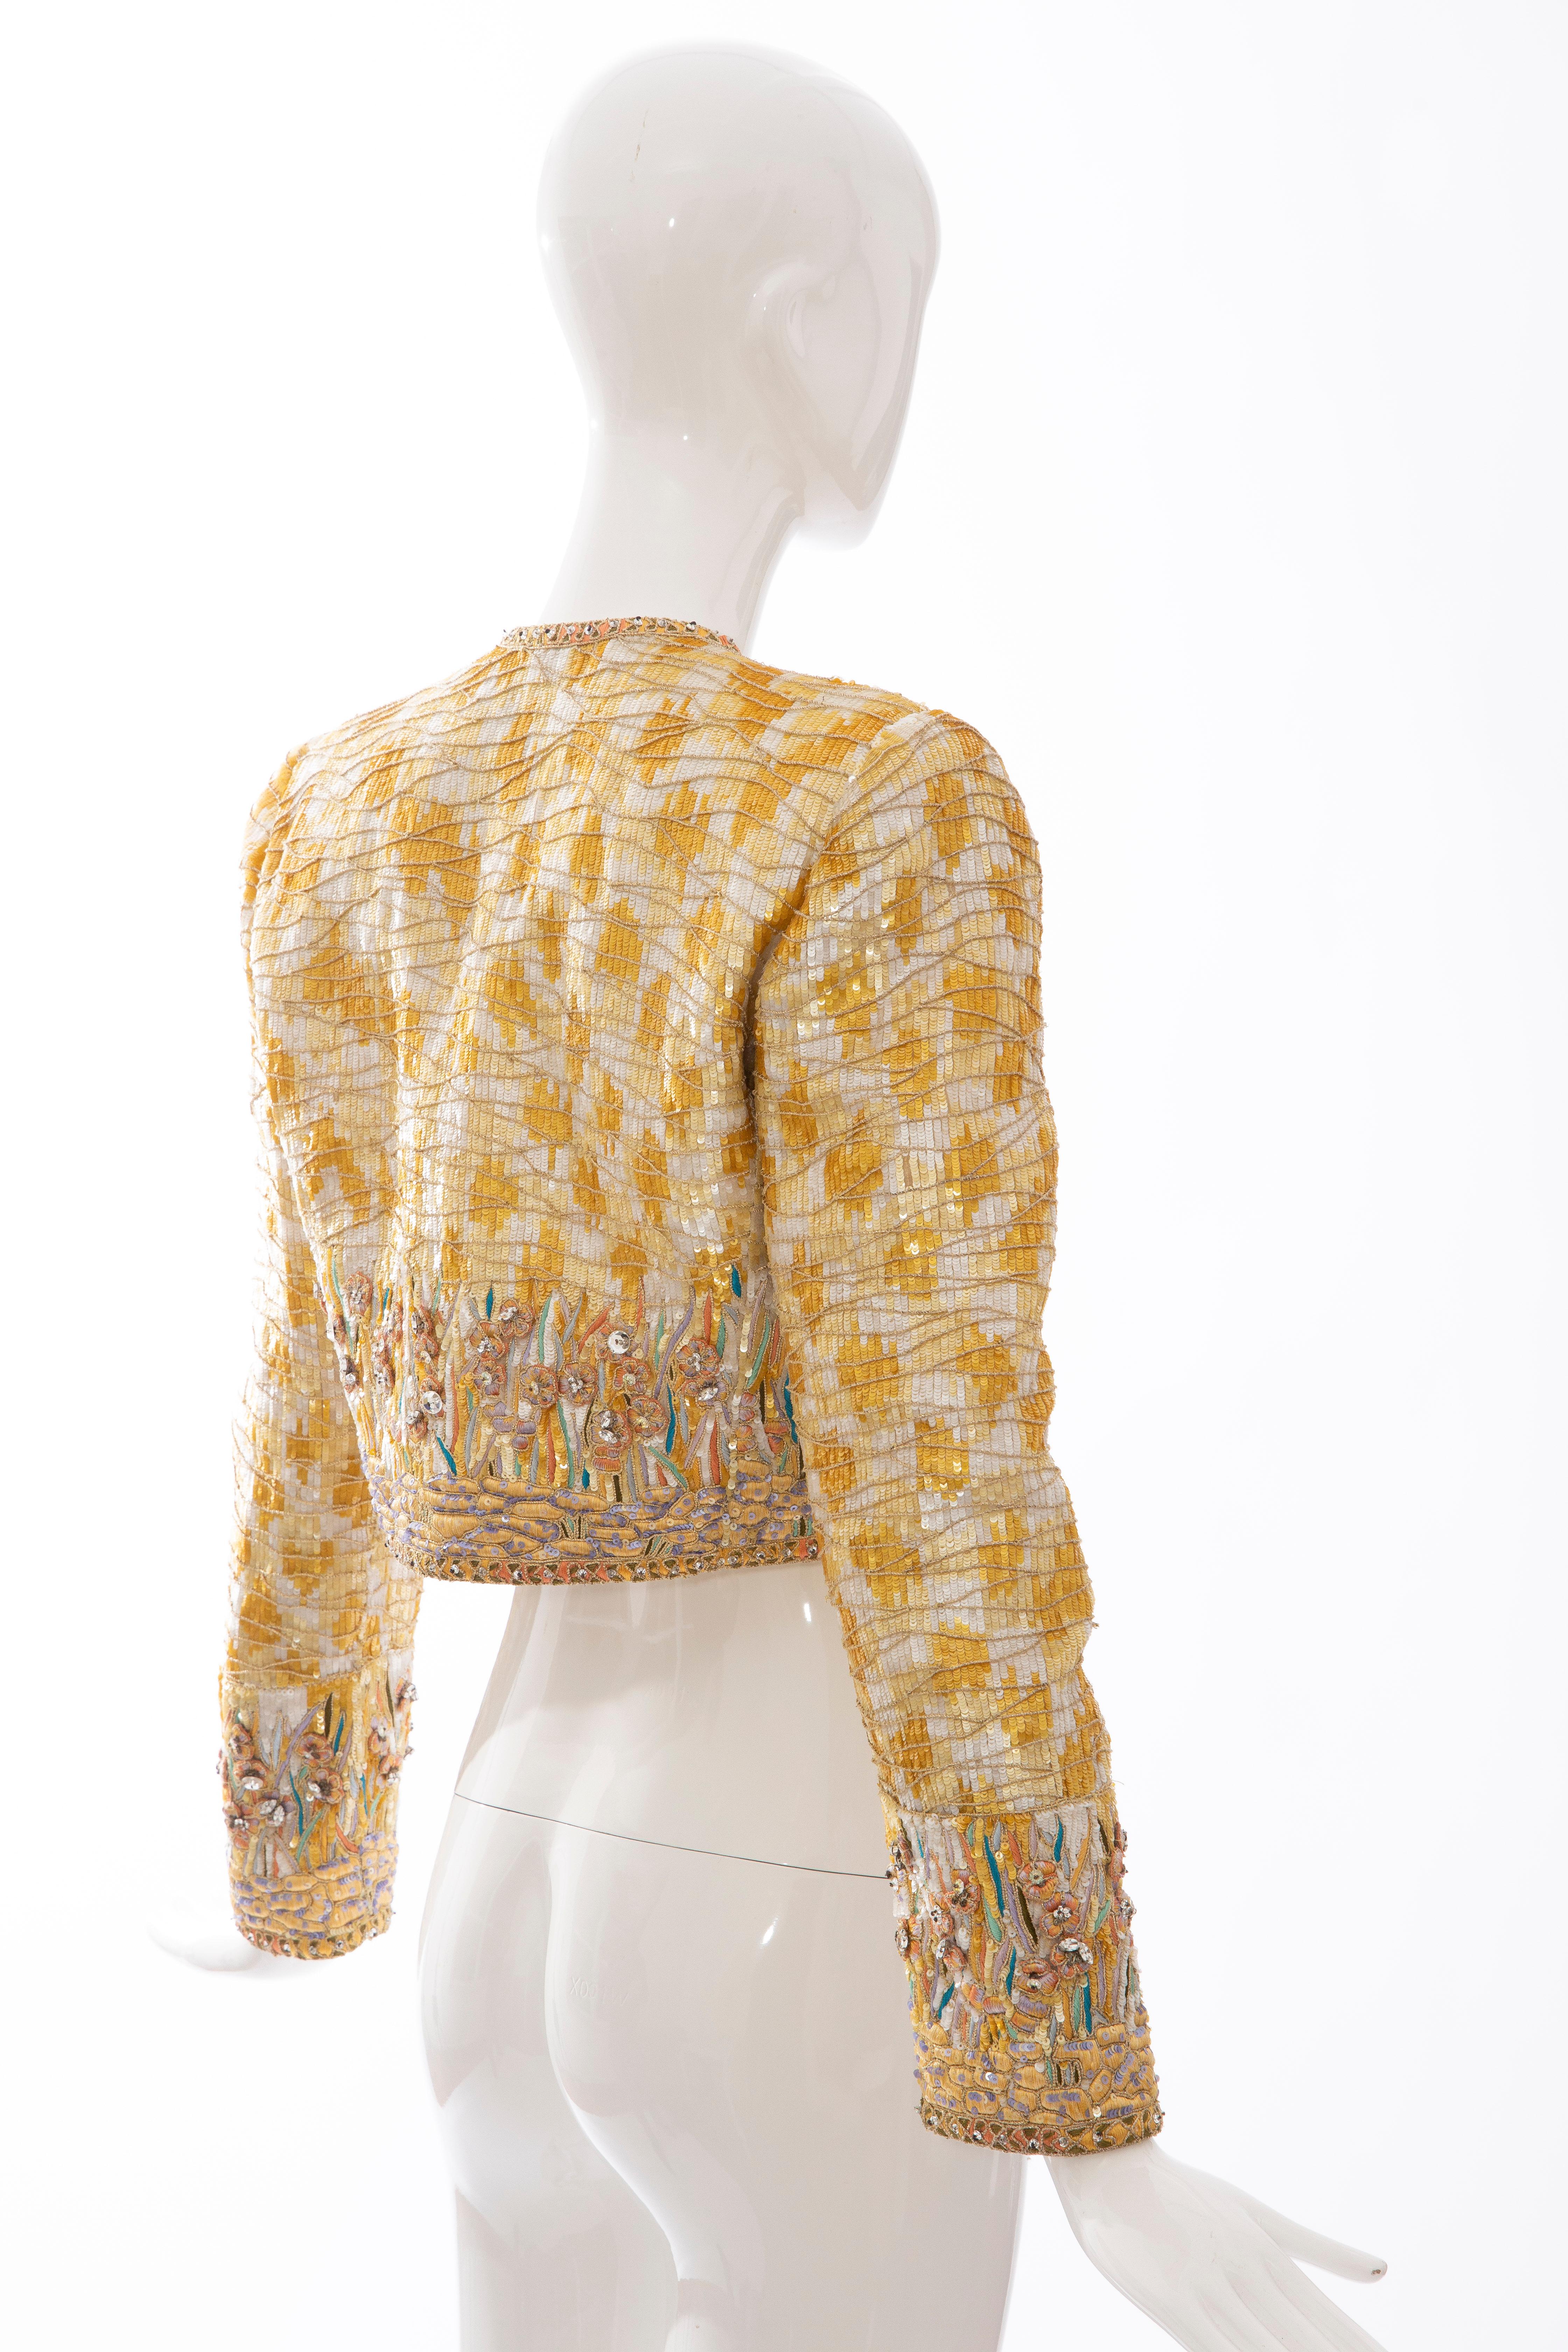 Women's Mary McFadden Couture Silk Embroidered Sequins Diamanté Bolero Jacket, ca. 1980's For Sale